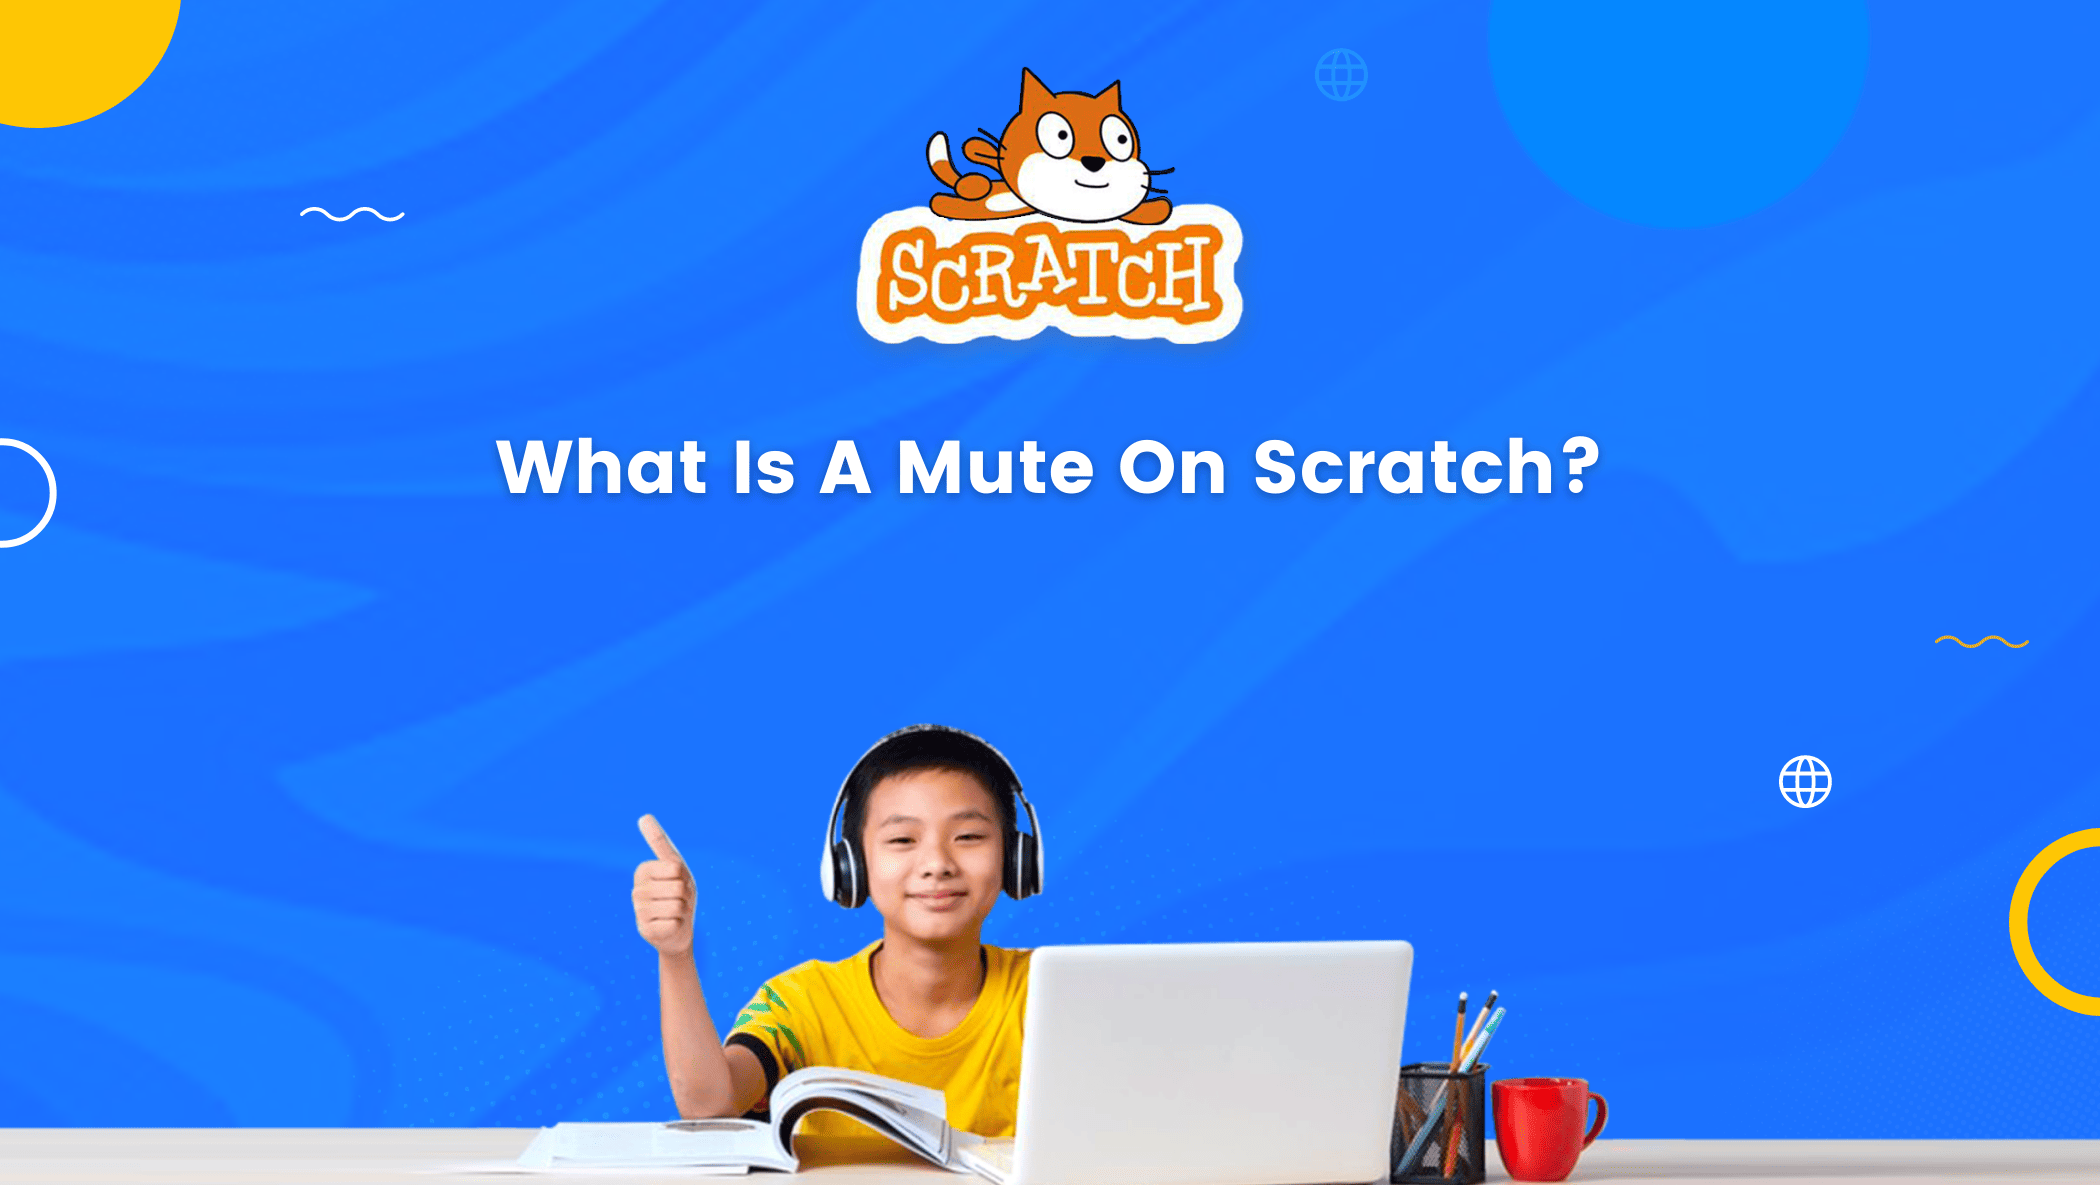 What Is A Mute On Scratch